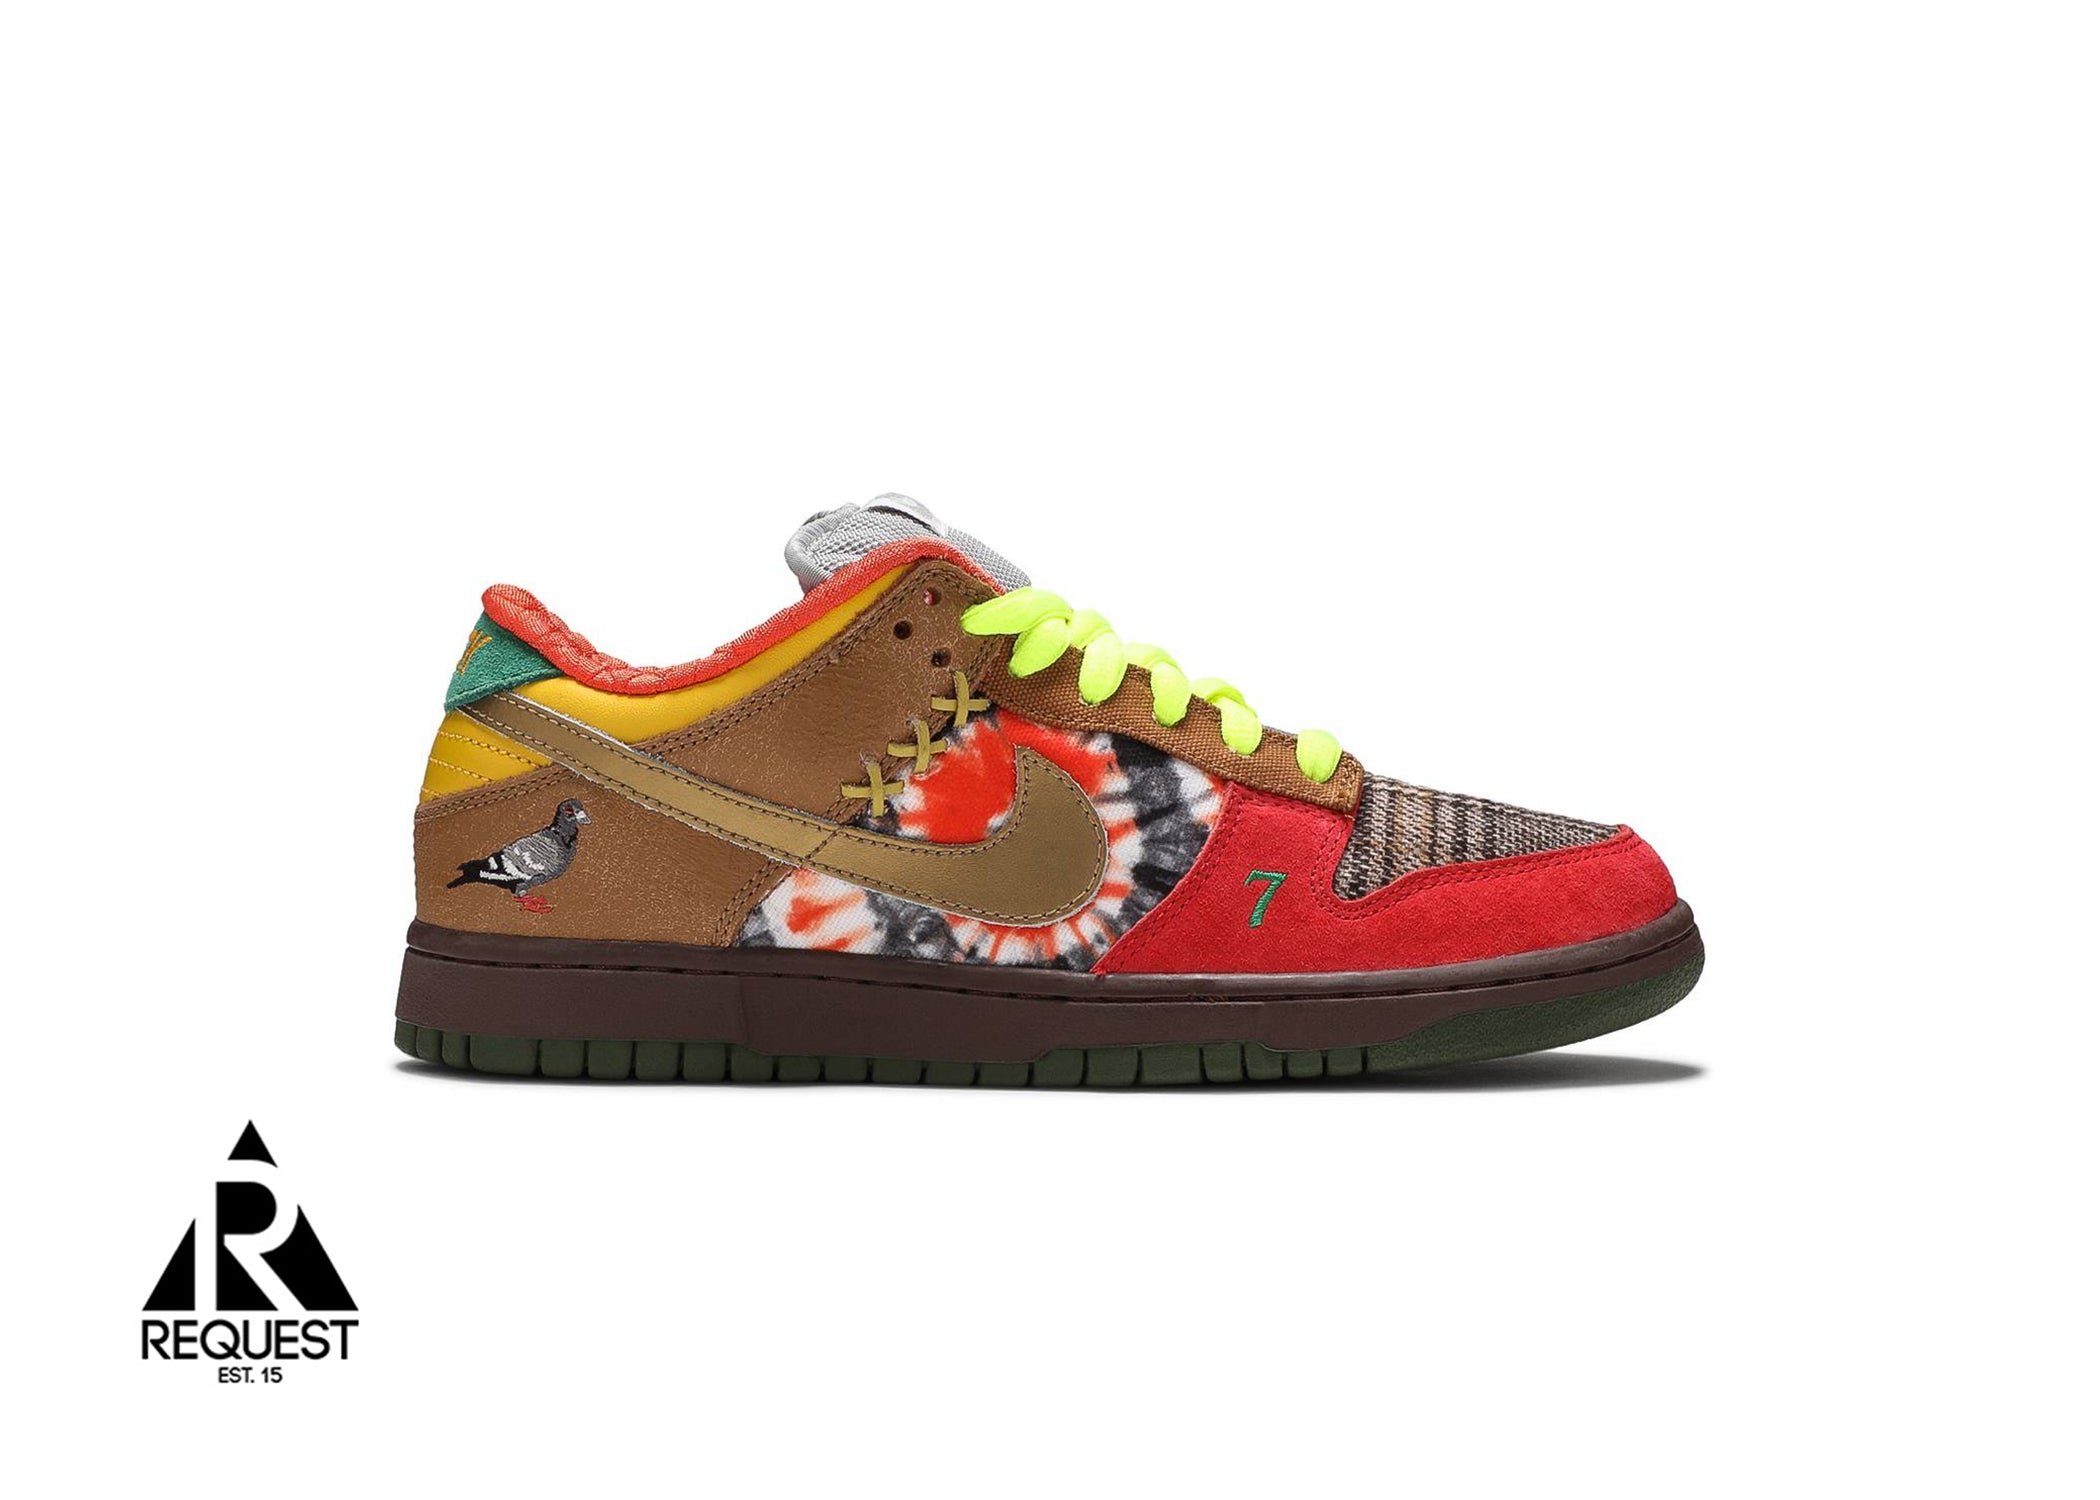 Nike Dunk SB Low " What The Dunk"